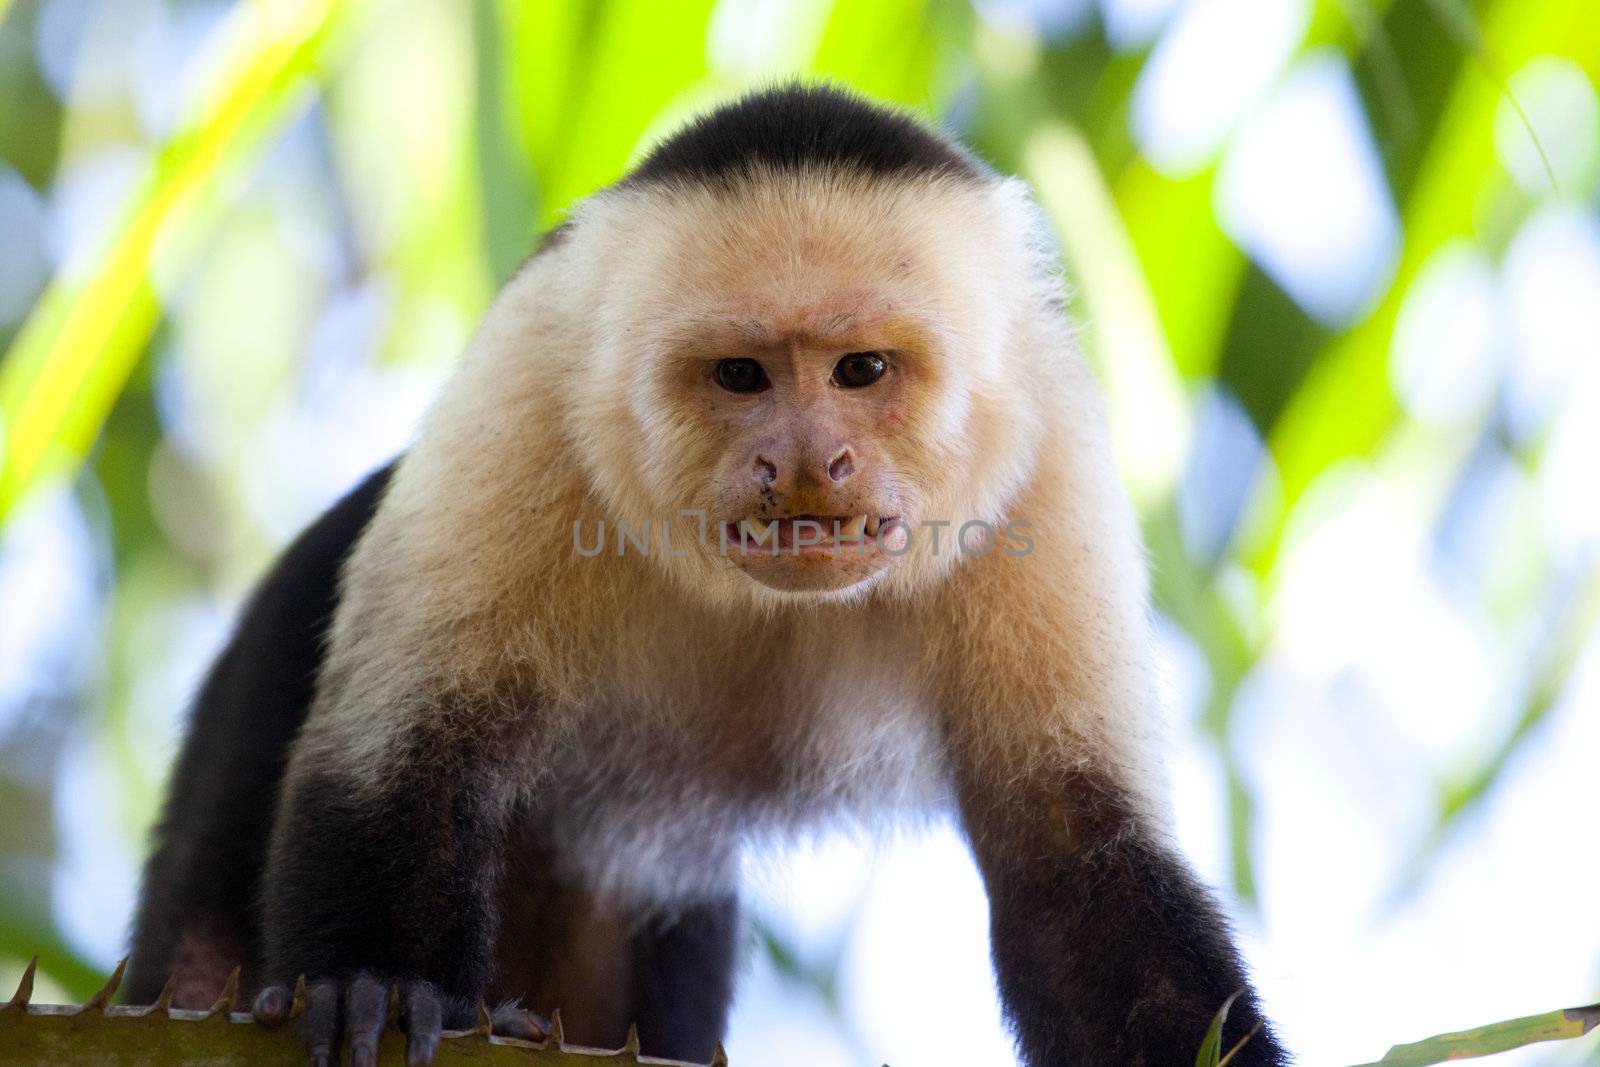 Male capuchin monkey looking with teeth bared